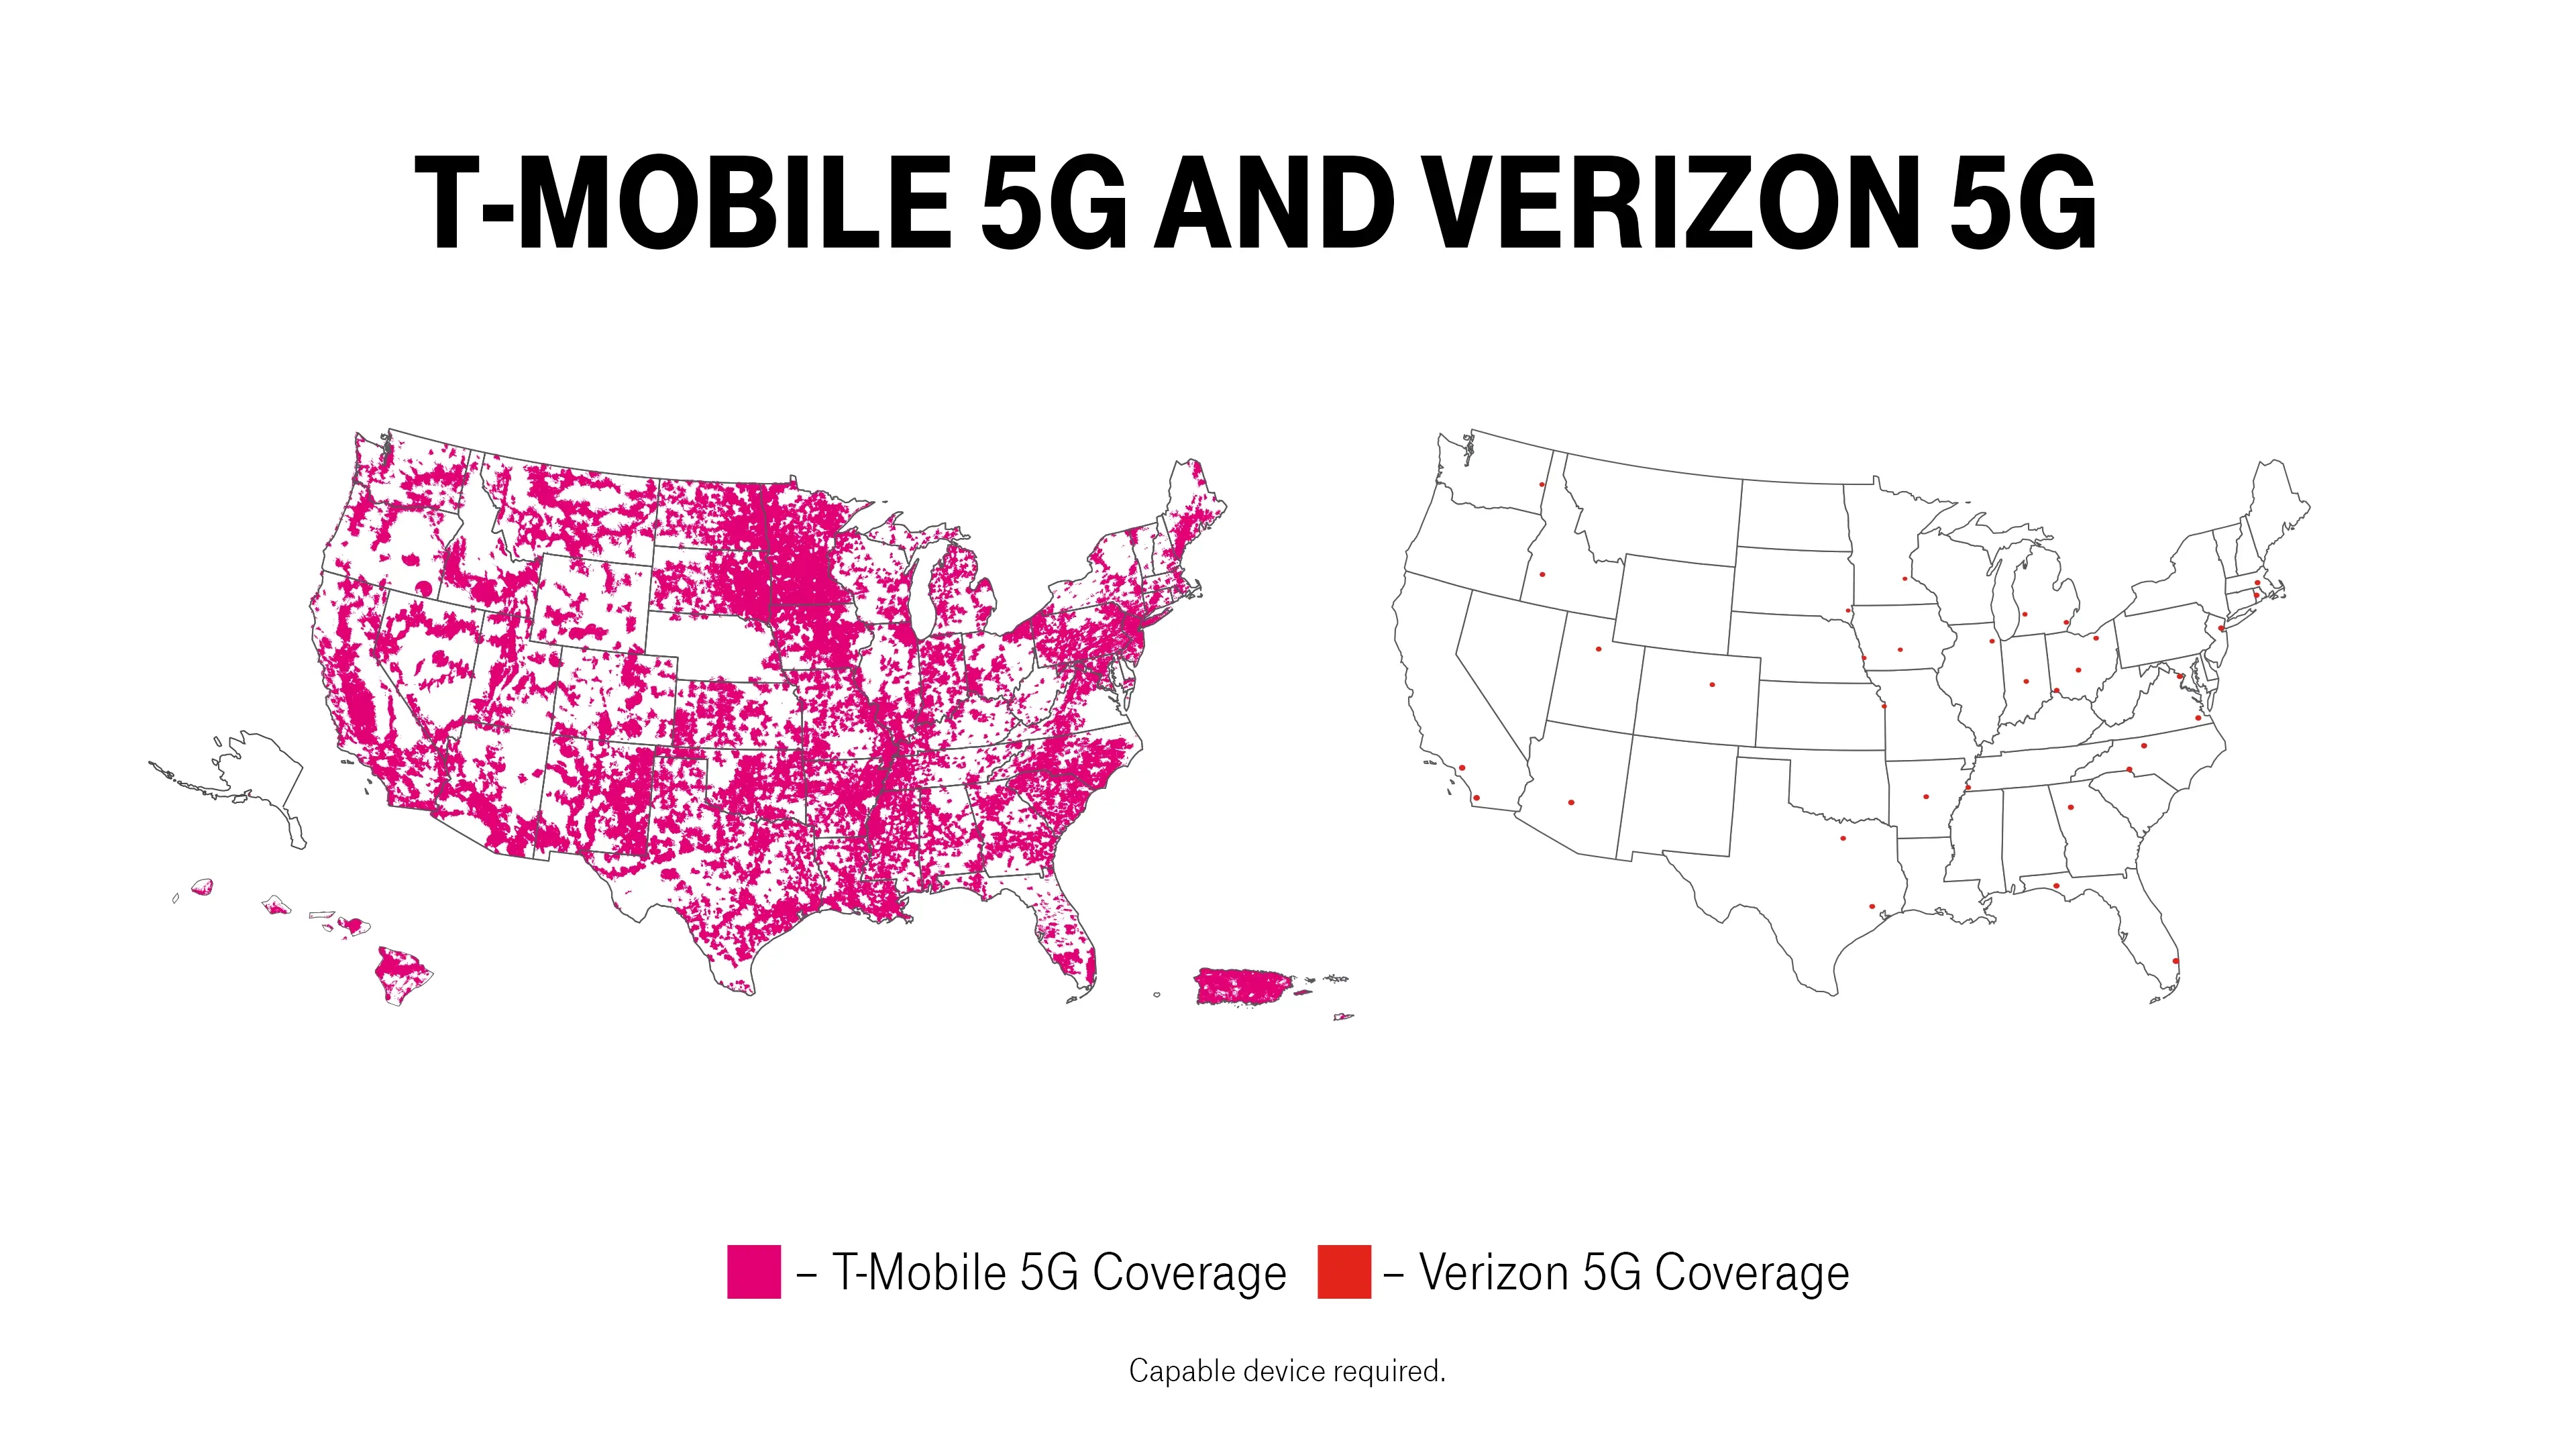 T-Mobile is killing Verizon and AT&T in the 5G race – Phandroid